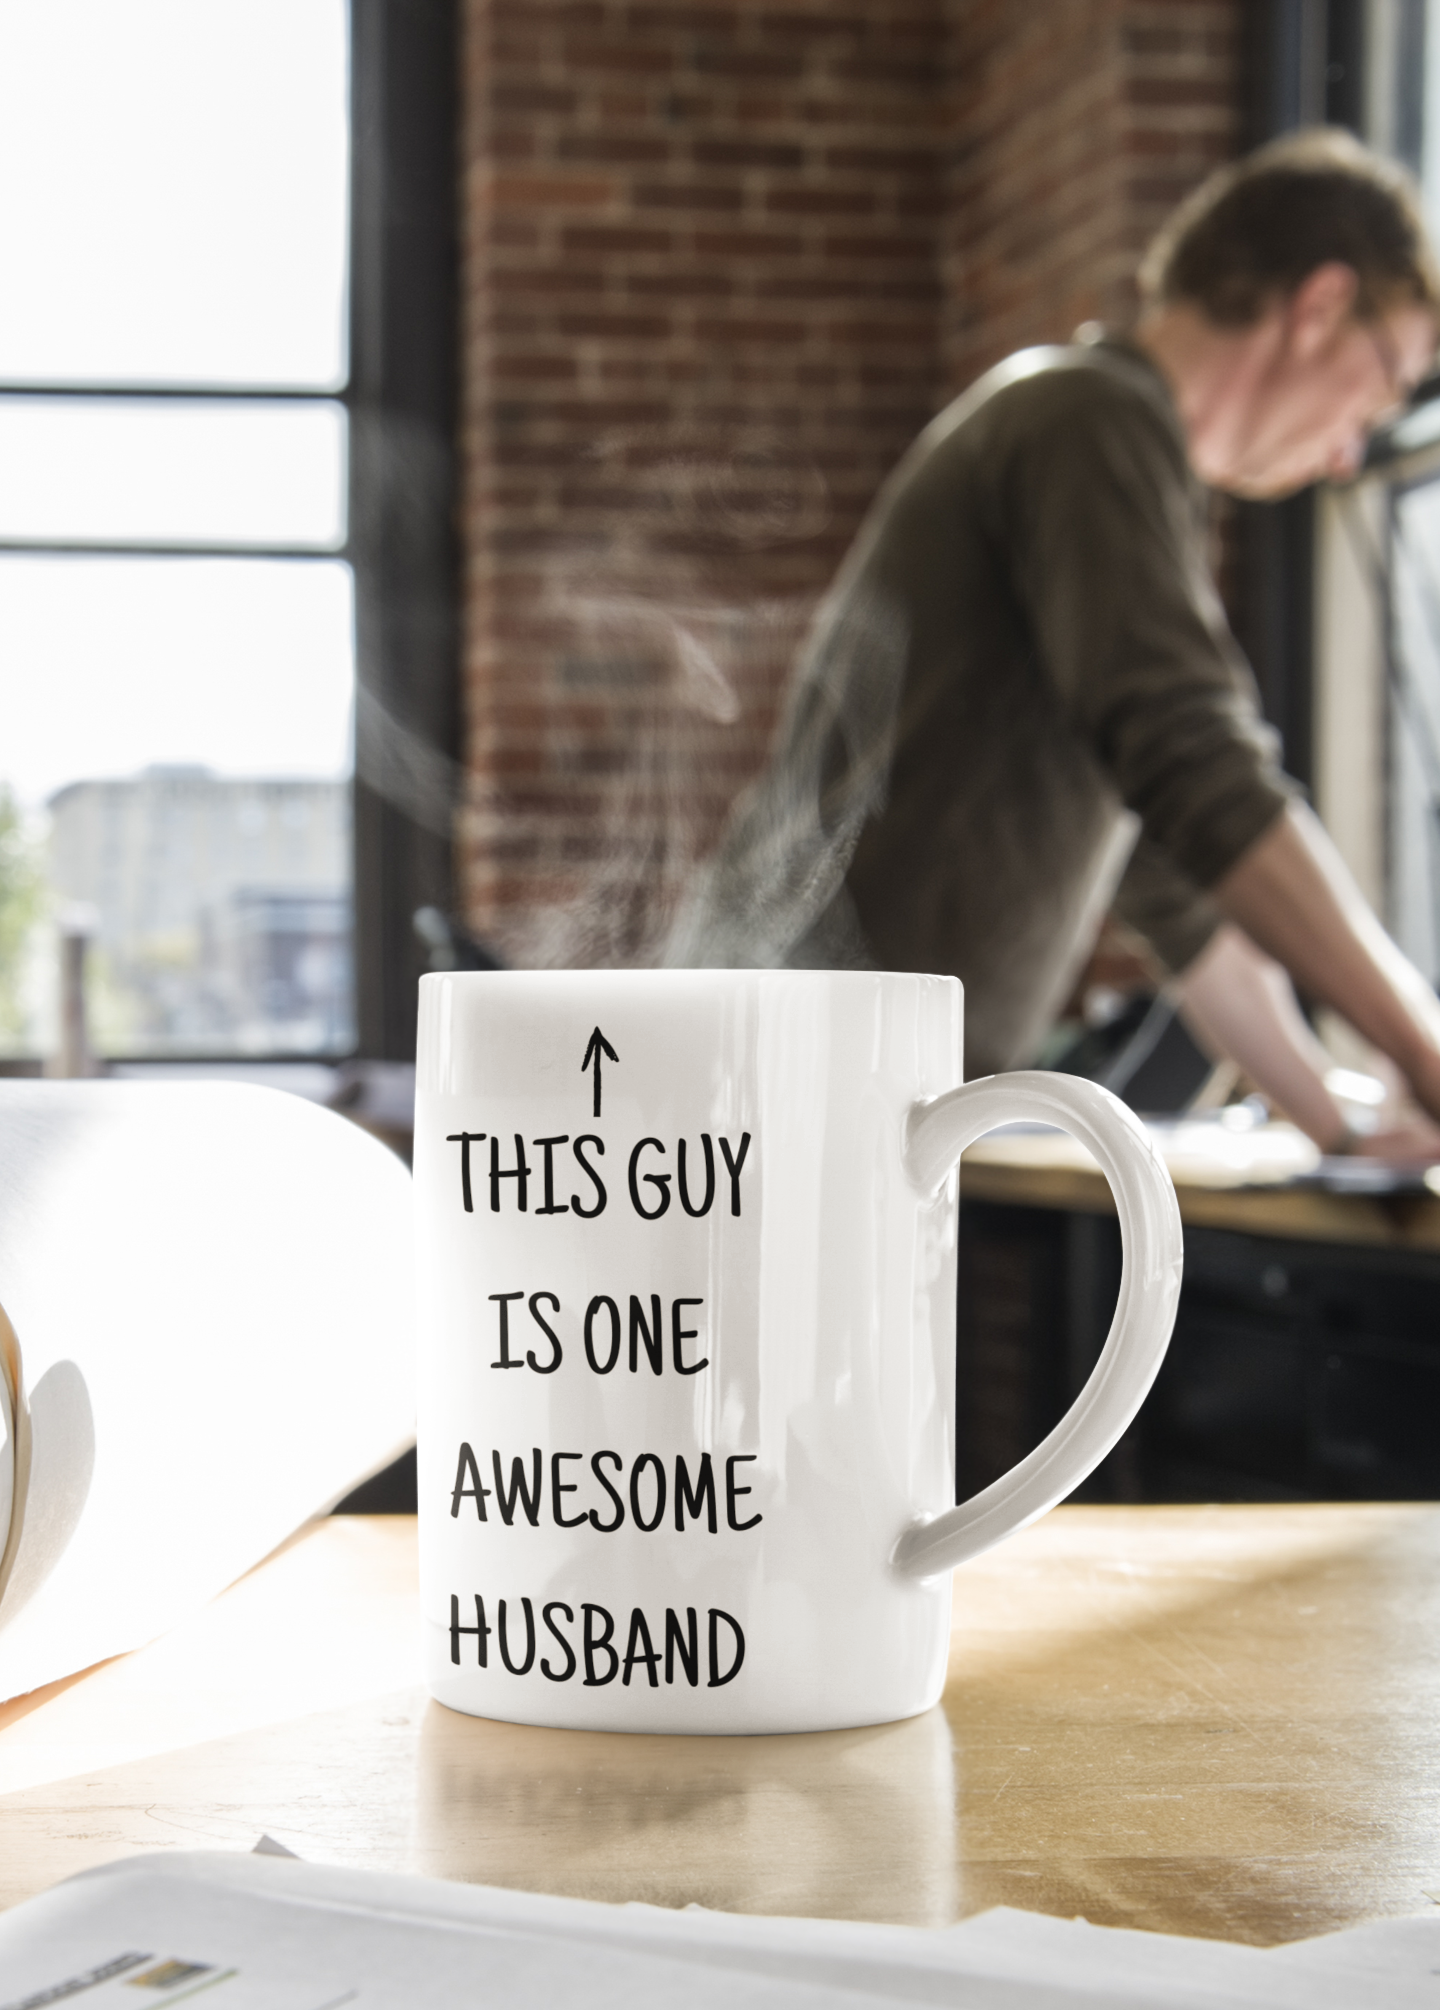 Awesome Husband Ceramic Coffee Mug Is Best Choice For Wives This Valentine’s Day